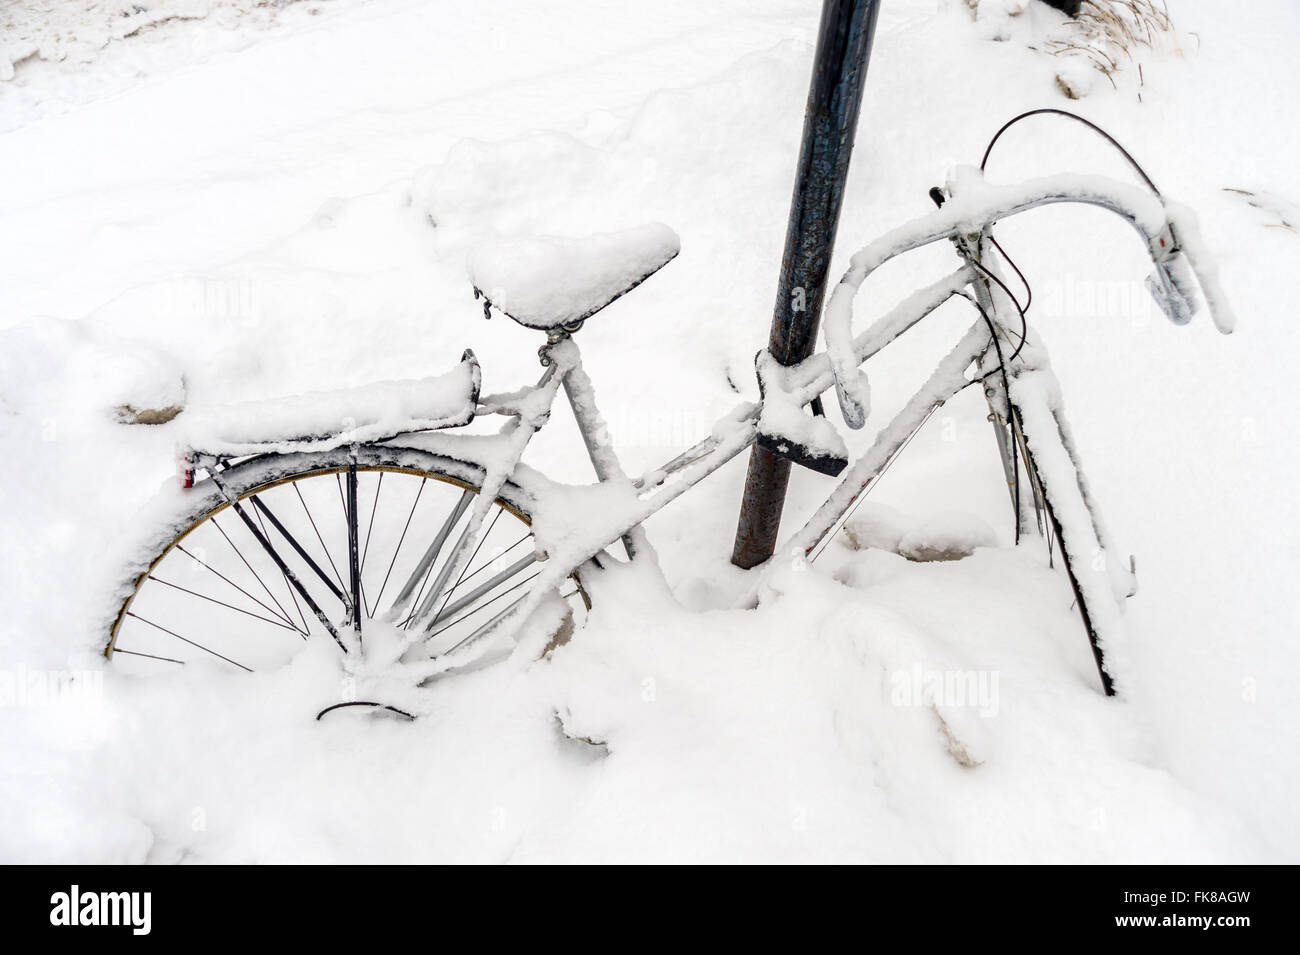 Bike covered in snow during snow storm Stock Photo